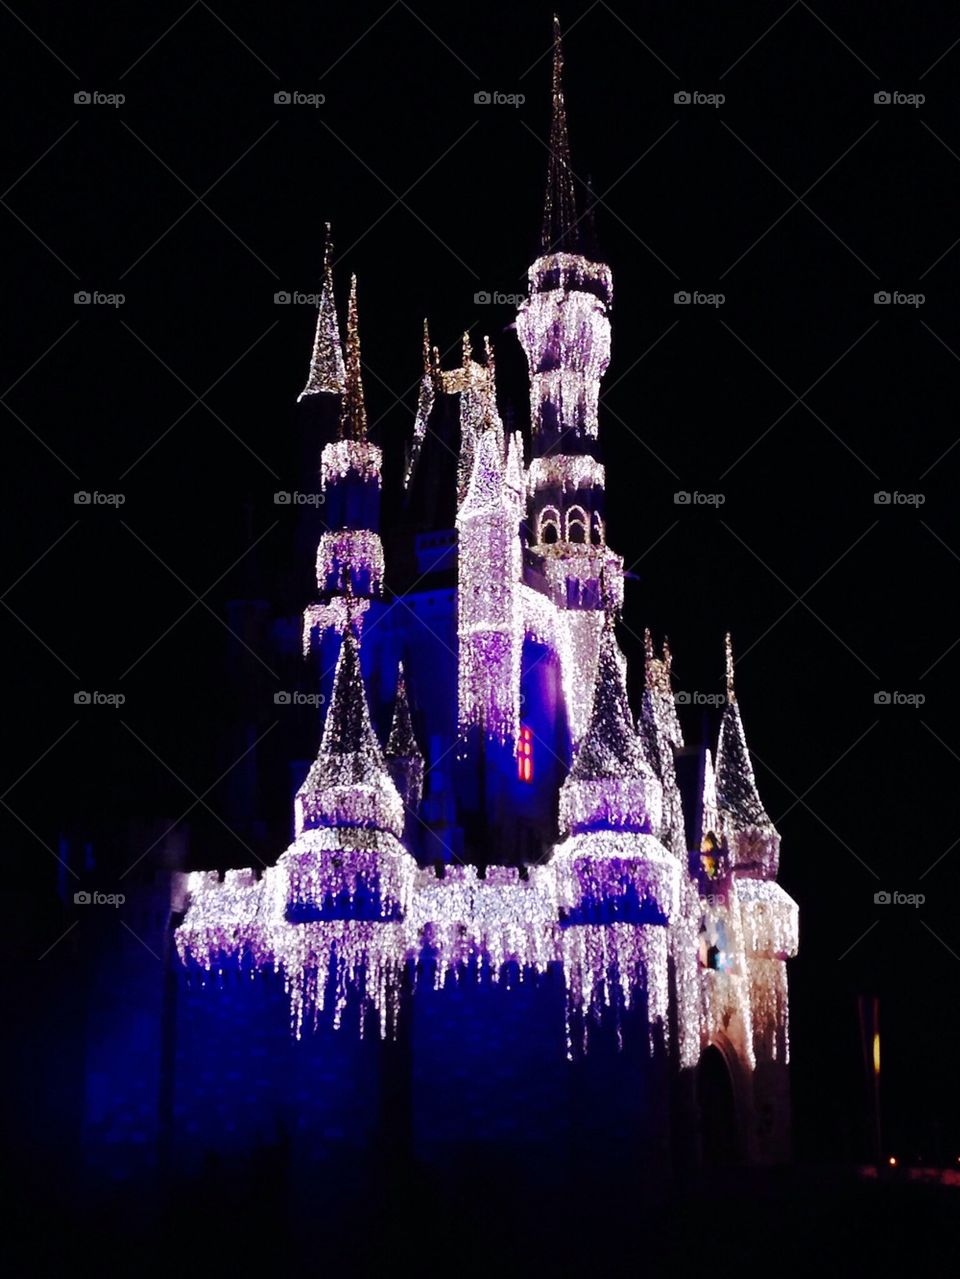 Disneys castle at night during christmas time